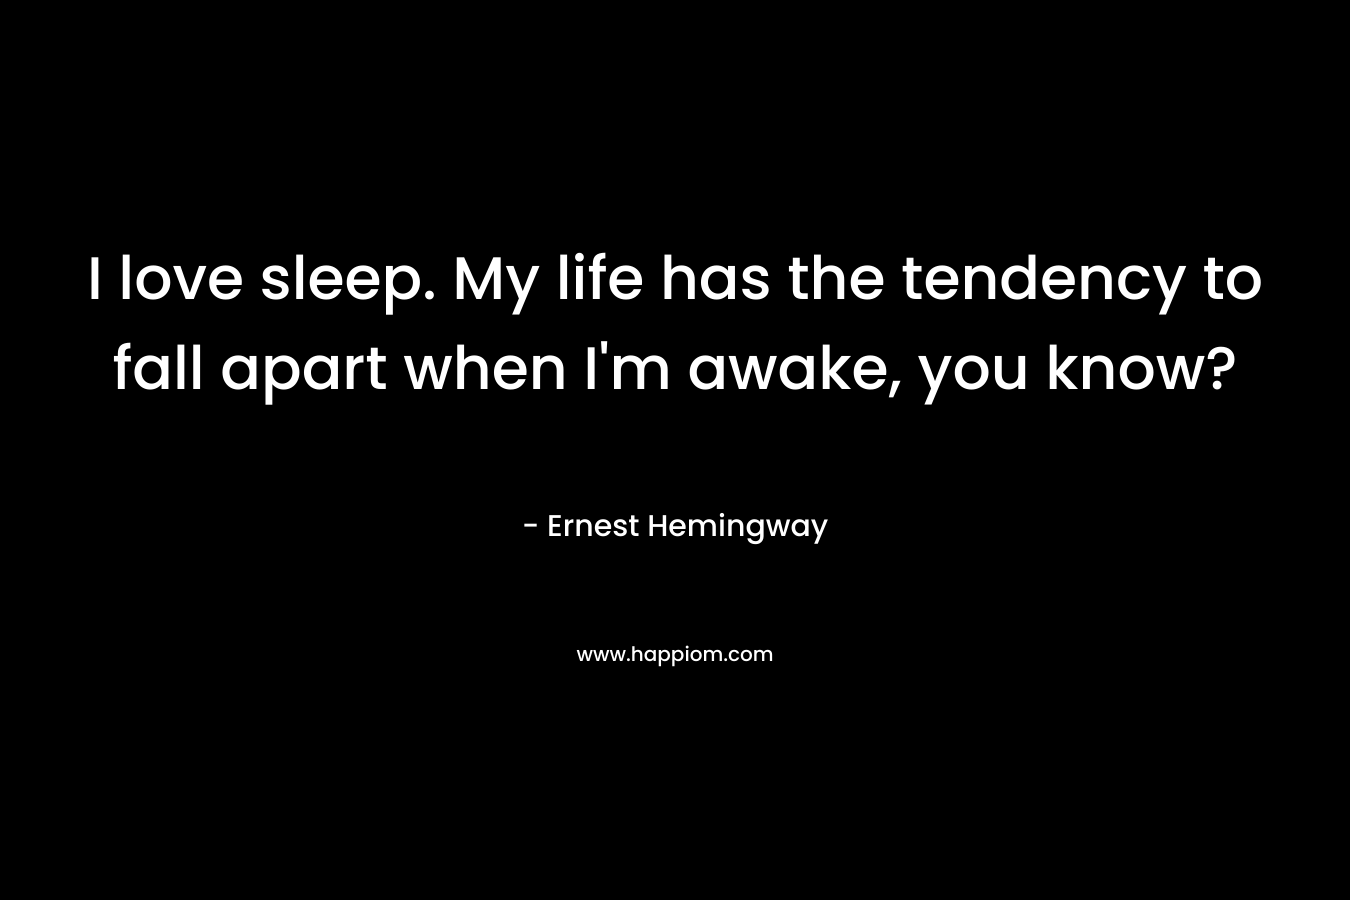 I love sleep. My life has the tendency to fall apart when I’m awake, you know? – Ernest Hemingway